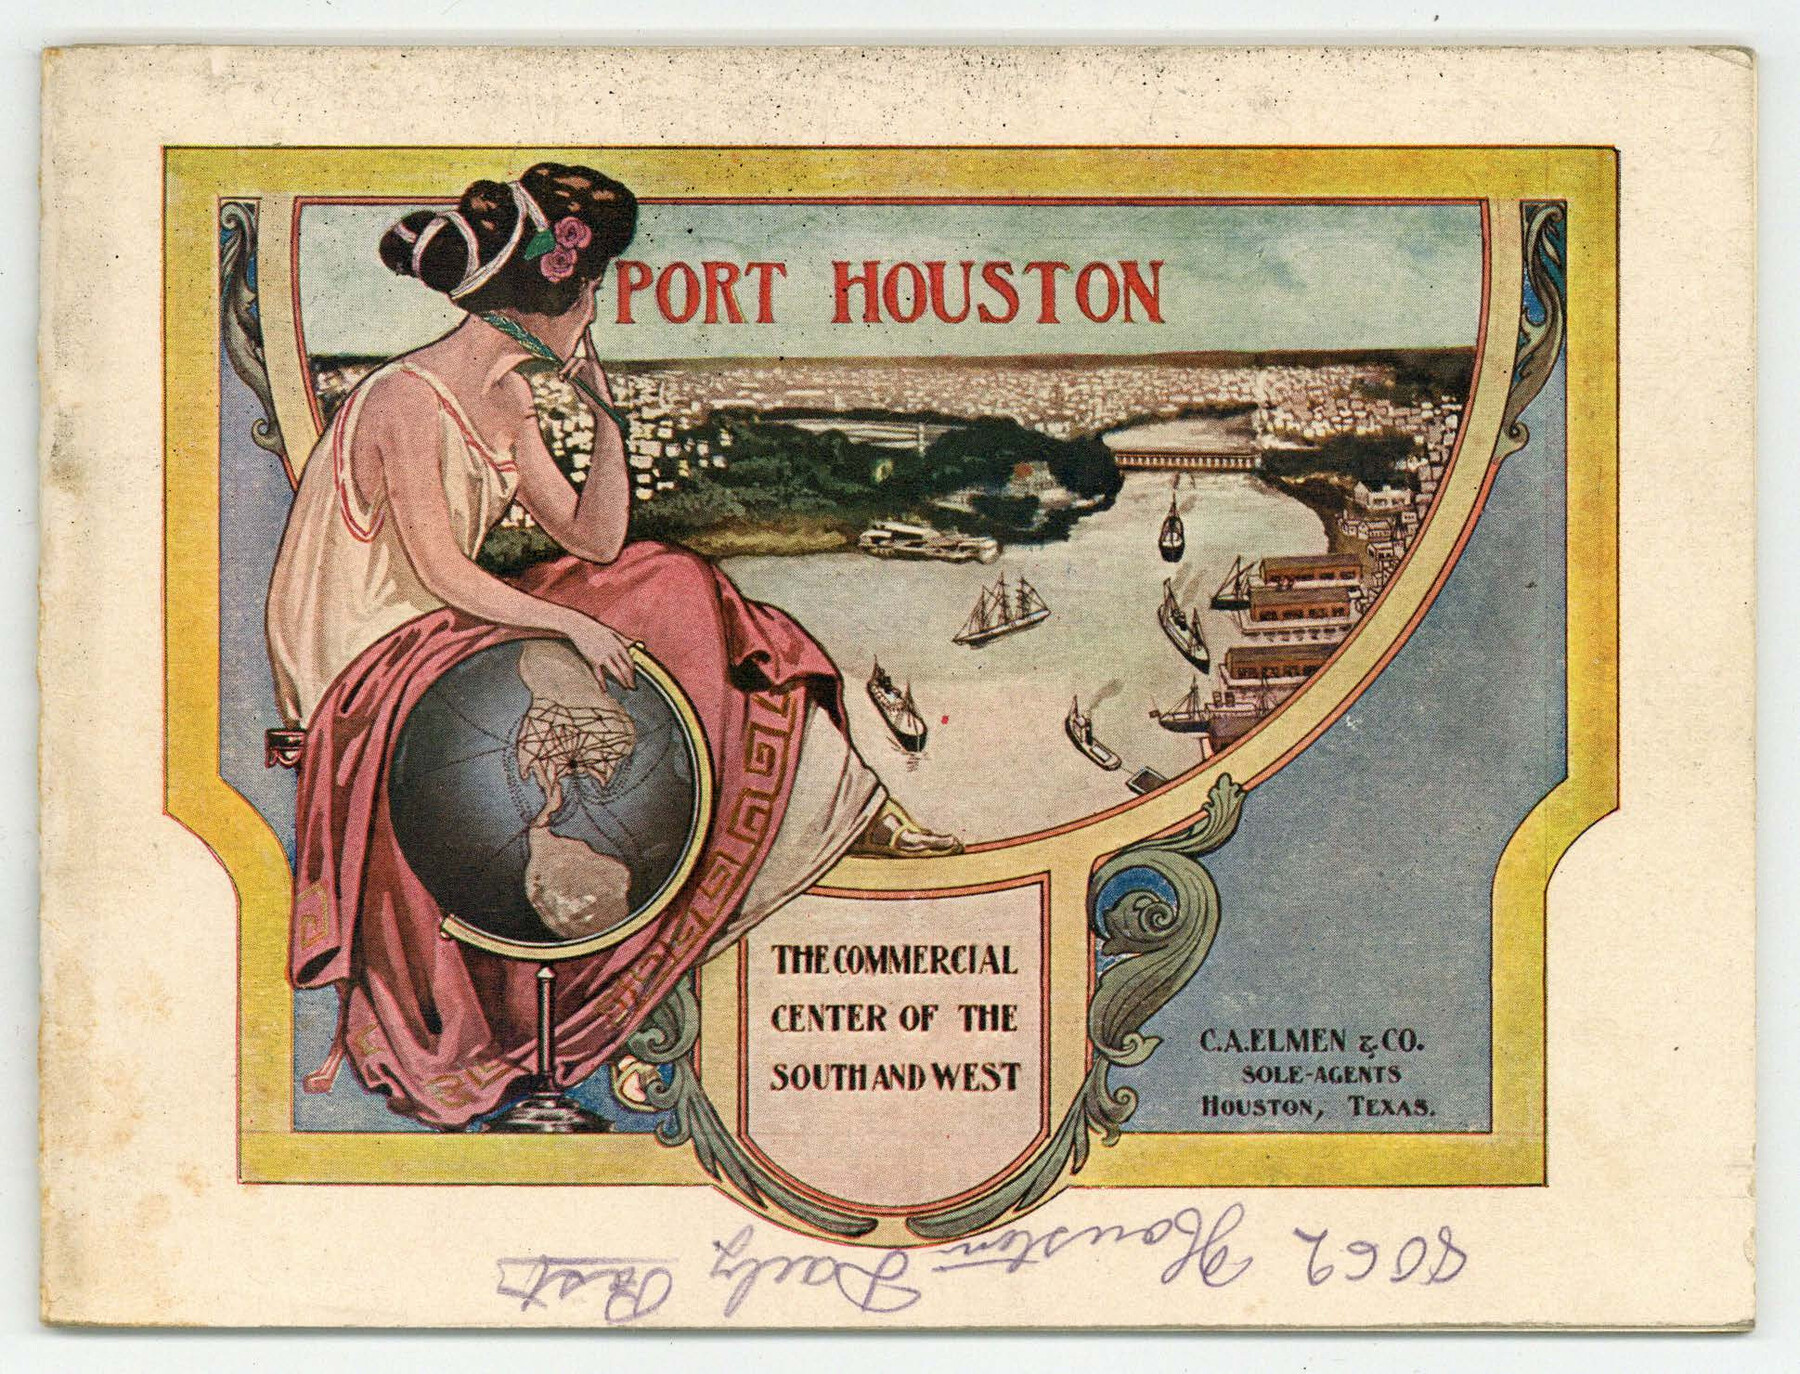 97068, Port Houston, the Commercial Center of the South and West